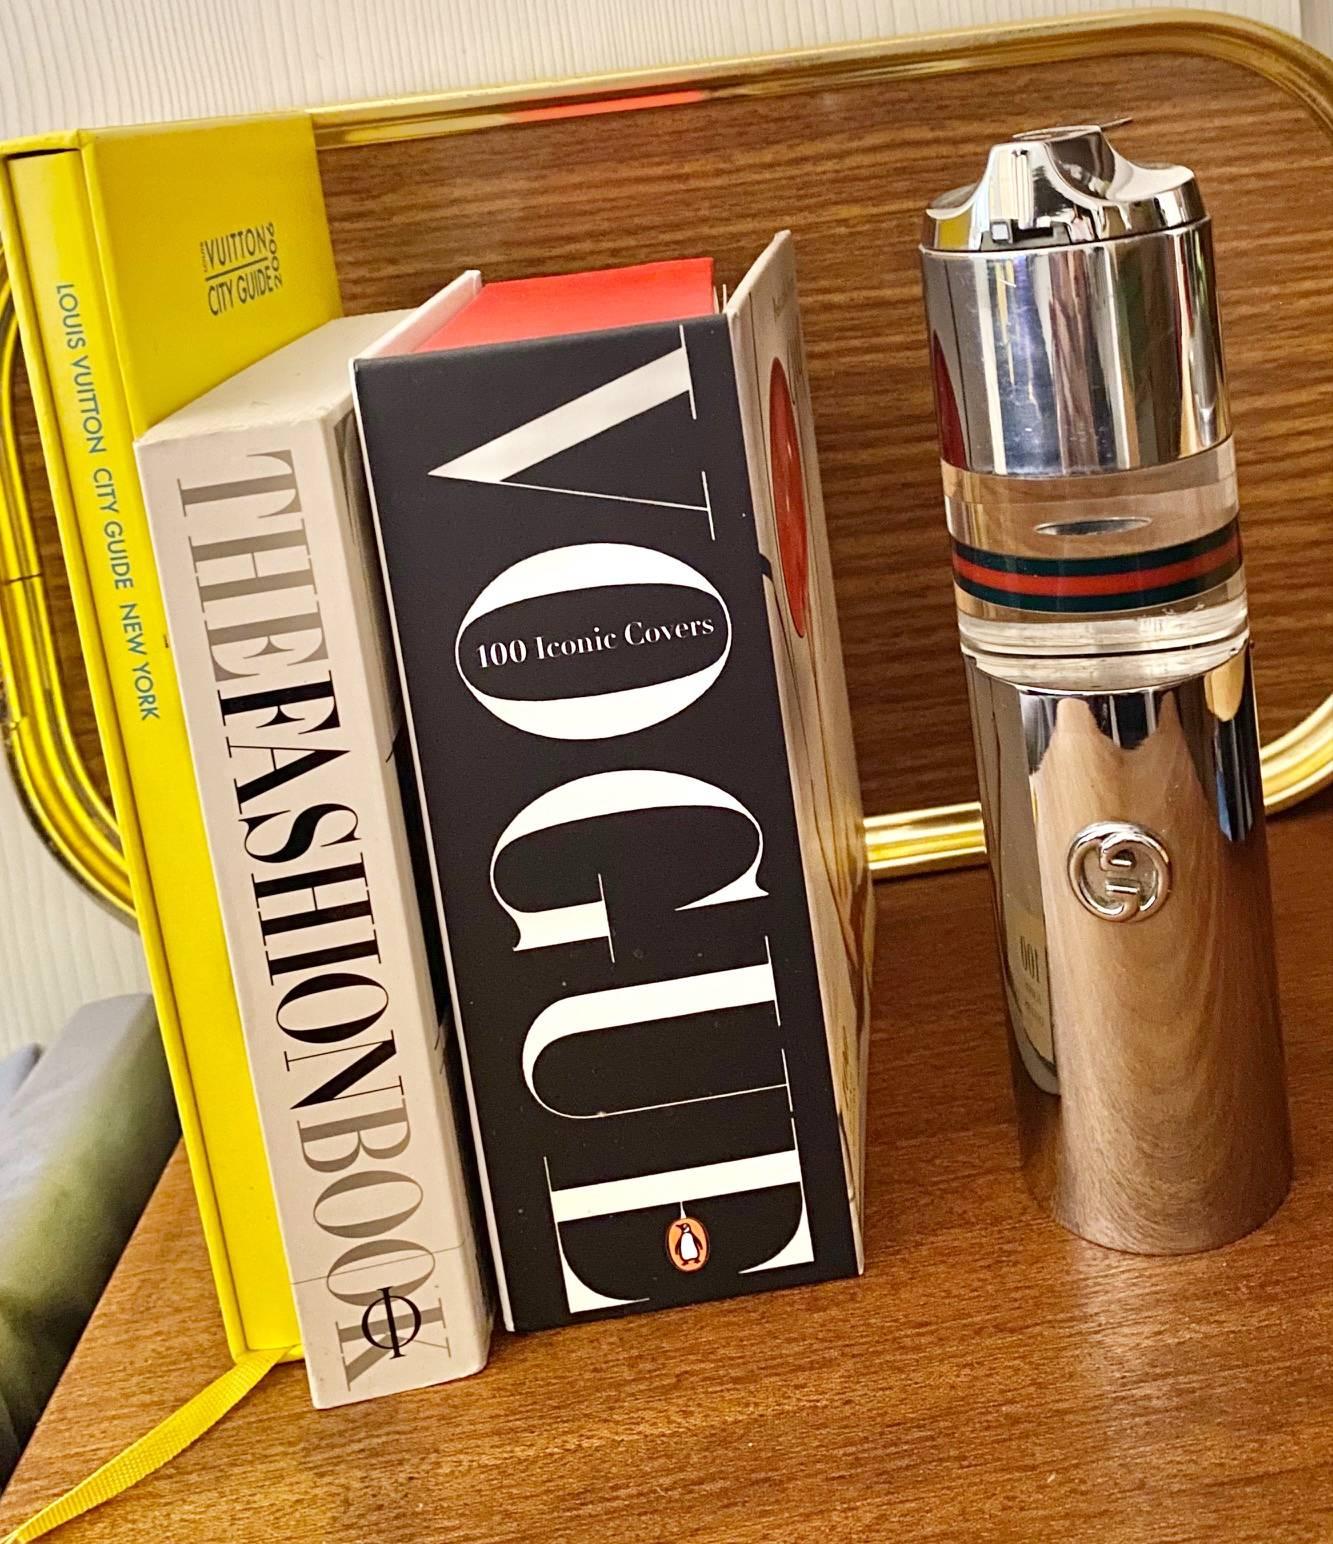 A rare vintage 1980s Gucci Italian table lighter in Lucite acrylic and metal chrome, stamped Gucci Made in Italy on the base. It splits in the middle as a vacuum hidden space for cigarettes or whatever you wish tucked away. It releases with a twist